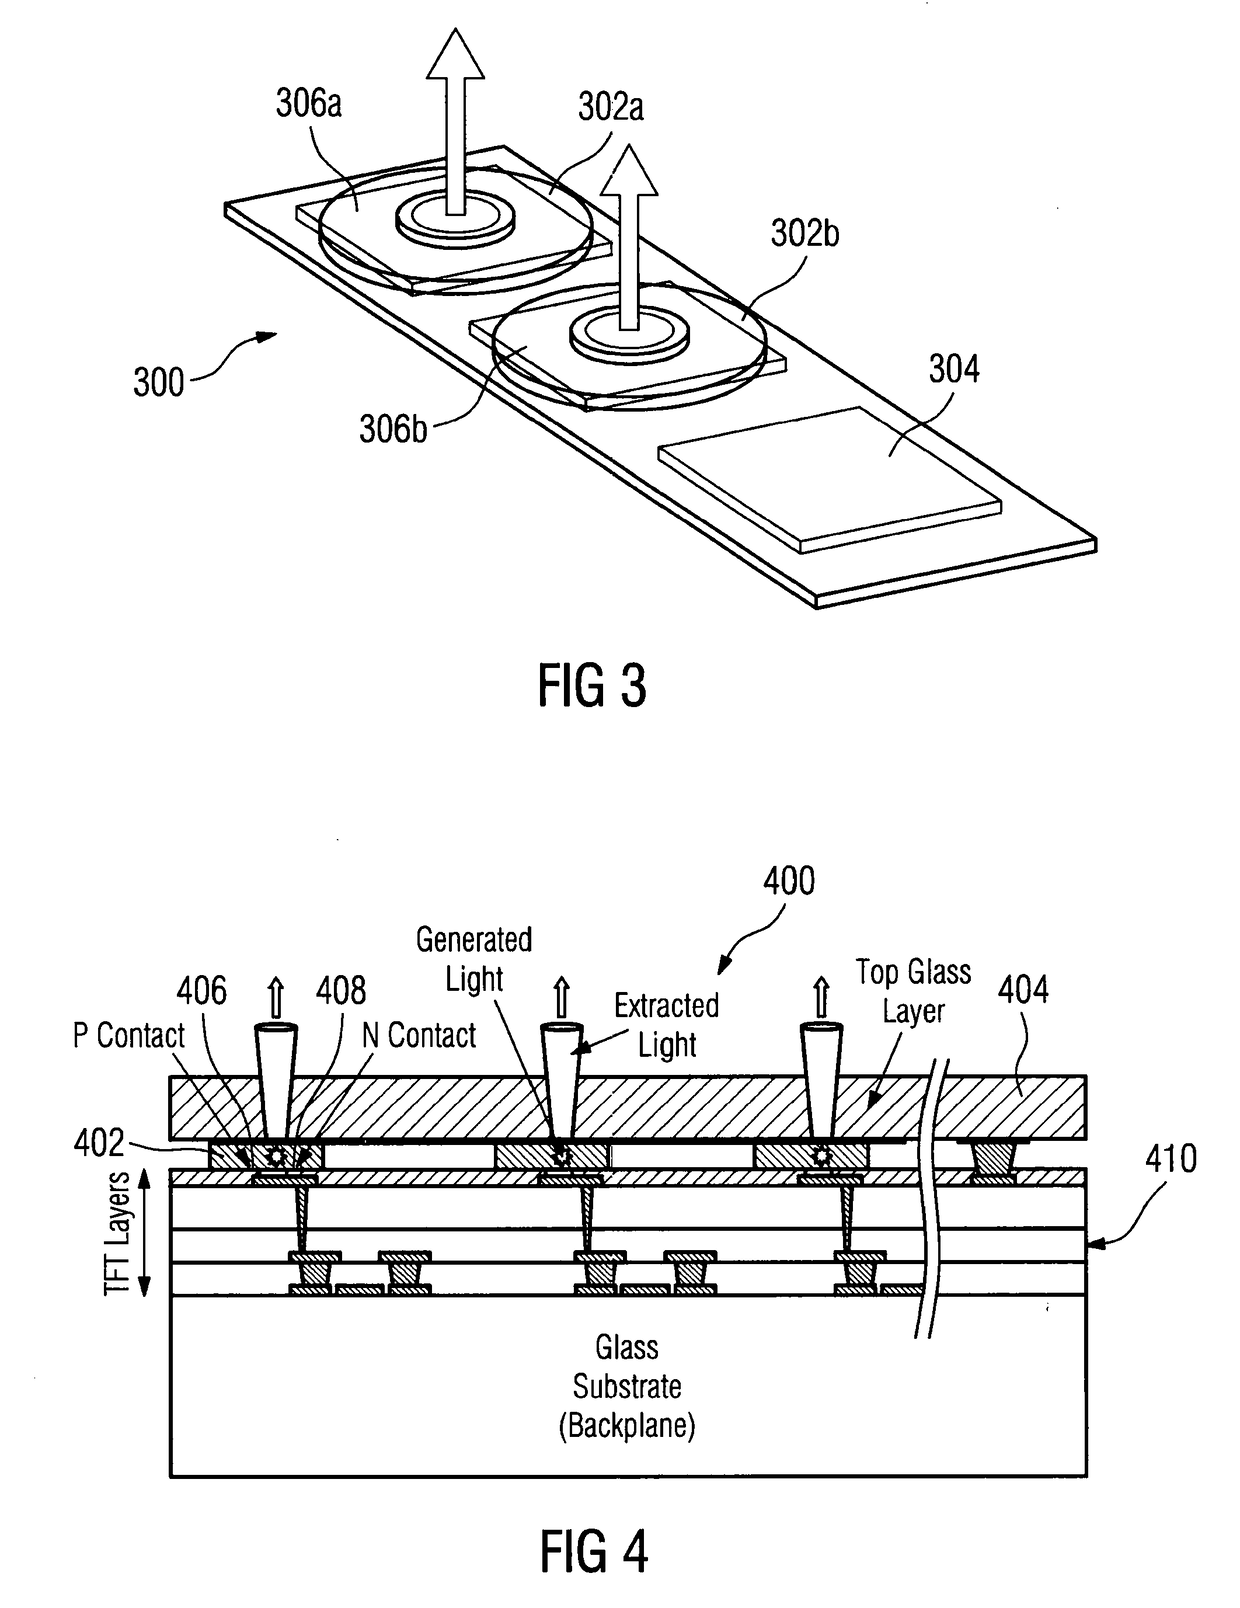 Assembly of semiconductor devices